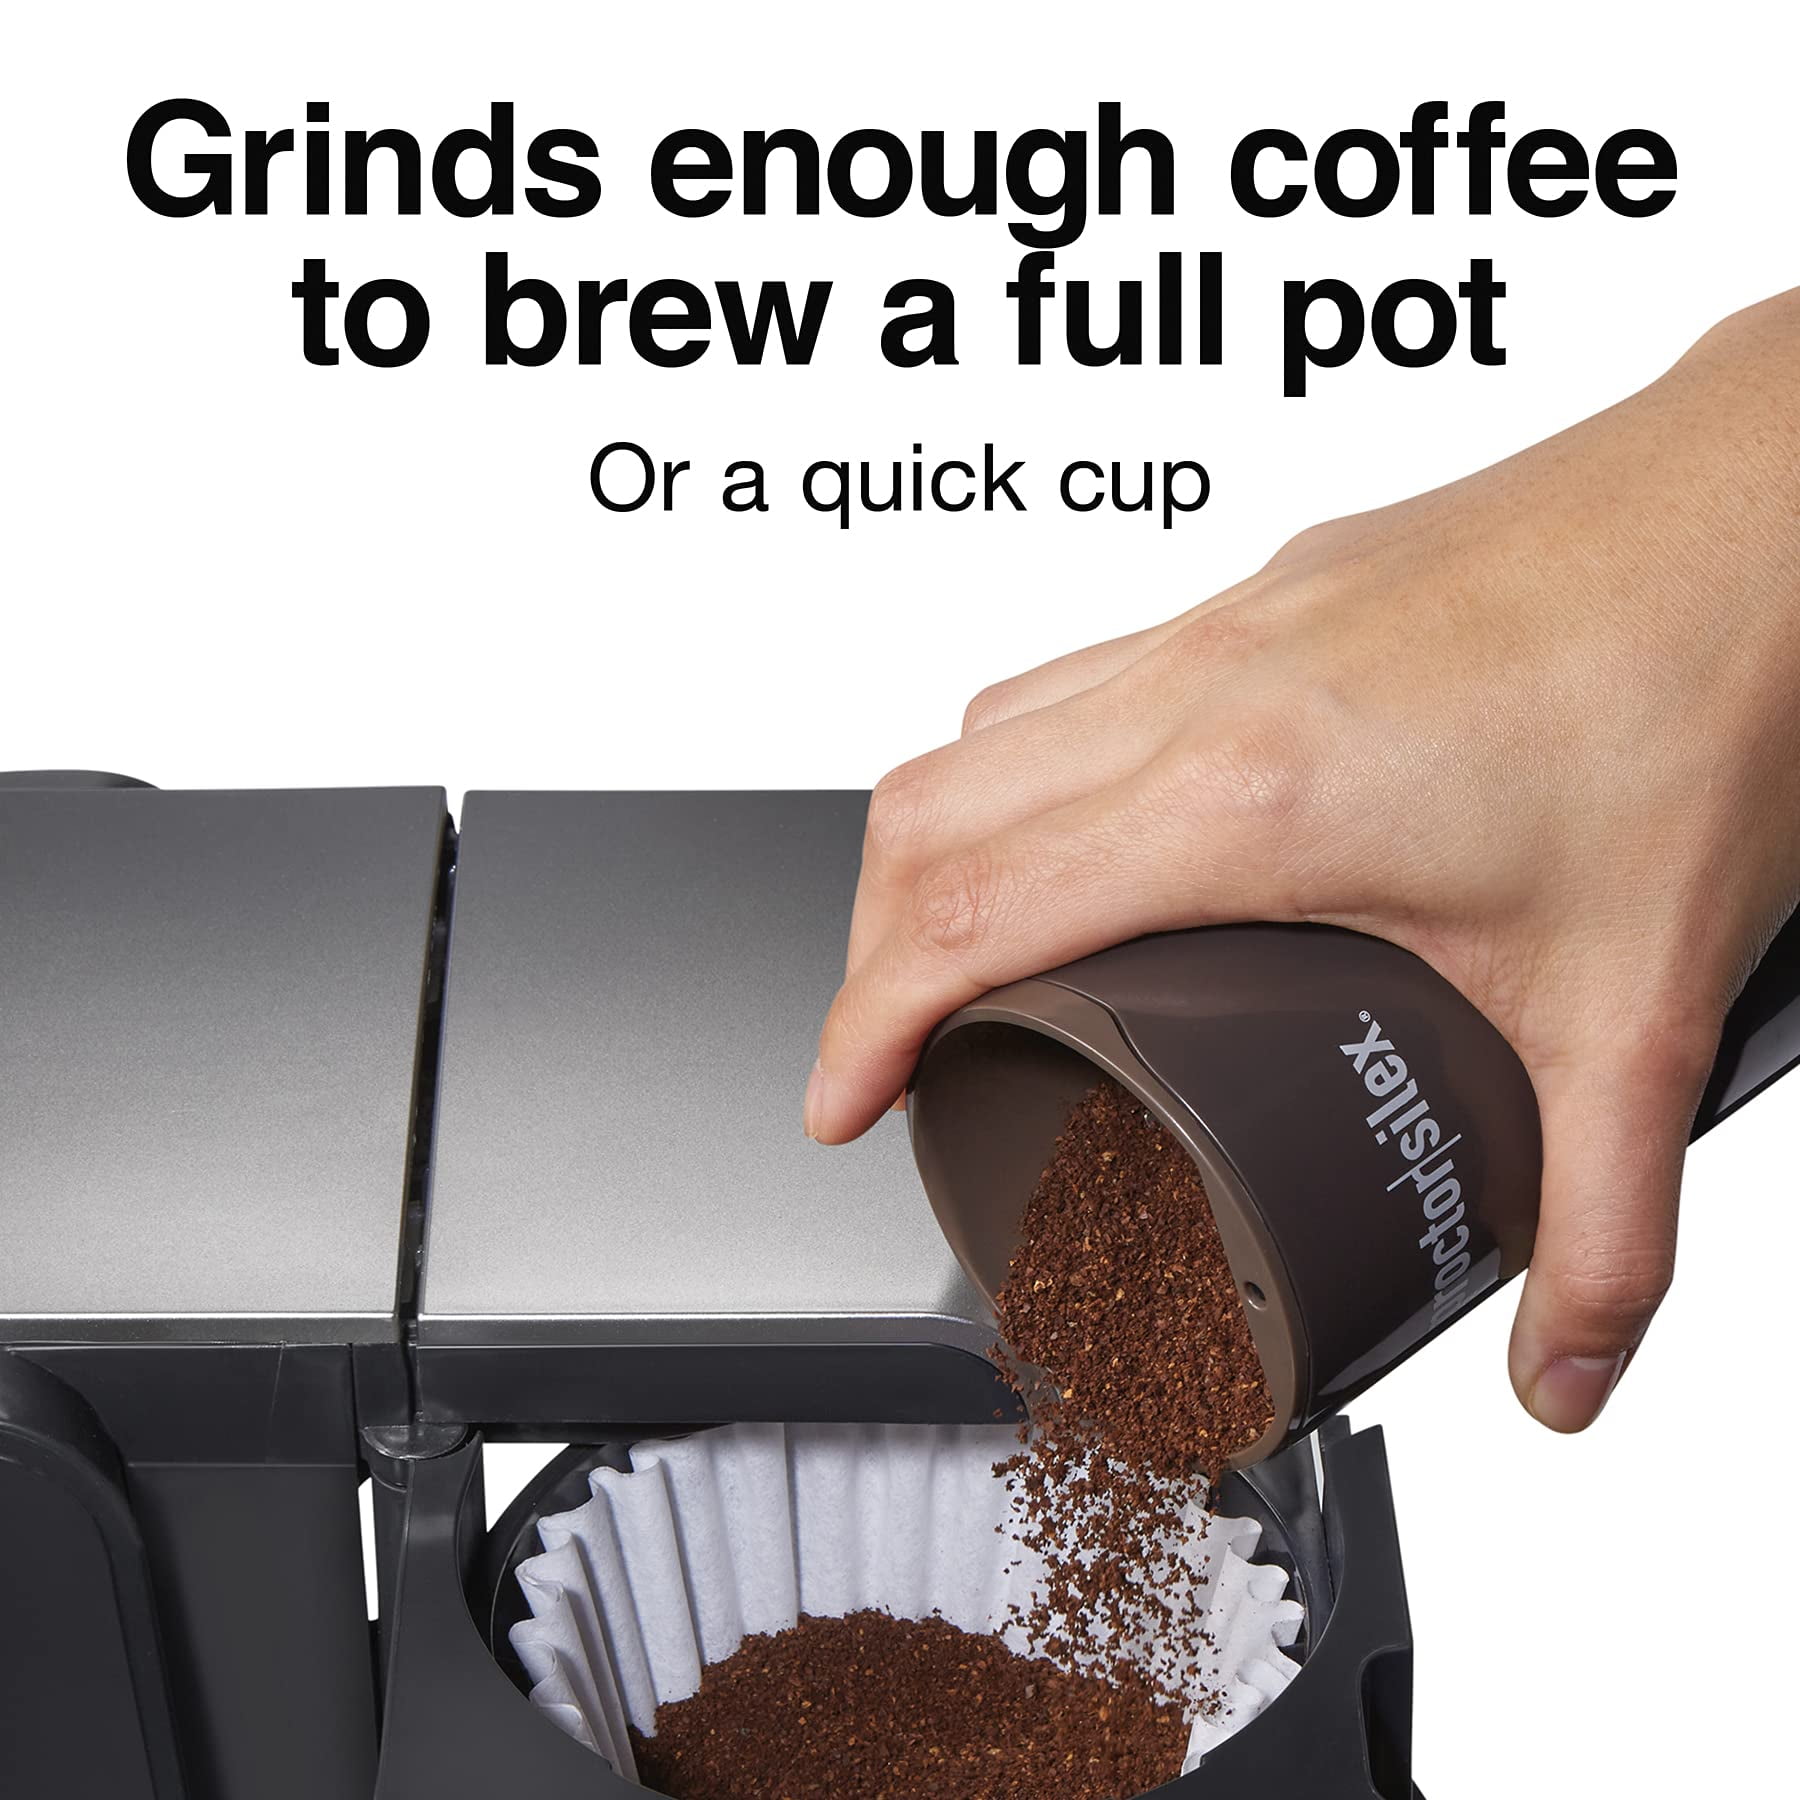 PROCTOR SILEX E160BY Fresh Grind Coffee Grinder, White NEW Open Box (BB6)  $13.20 - PicClick